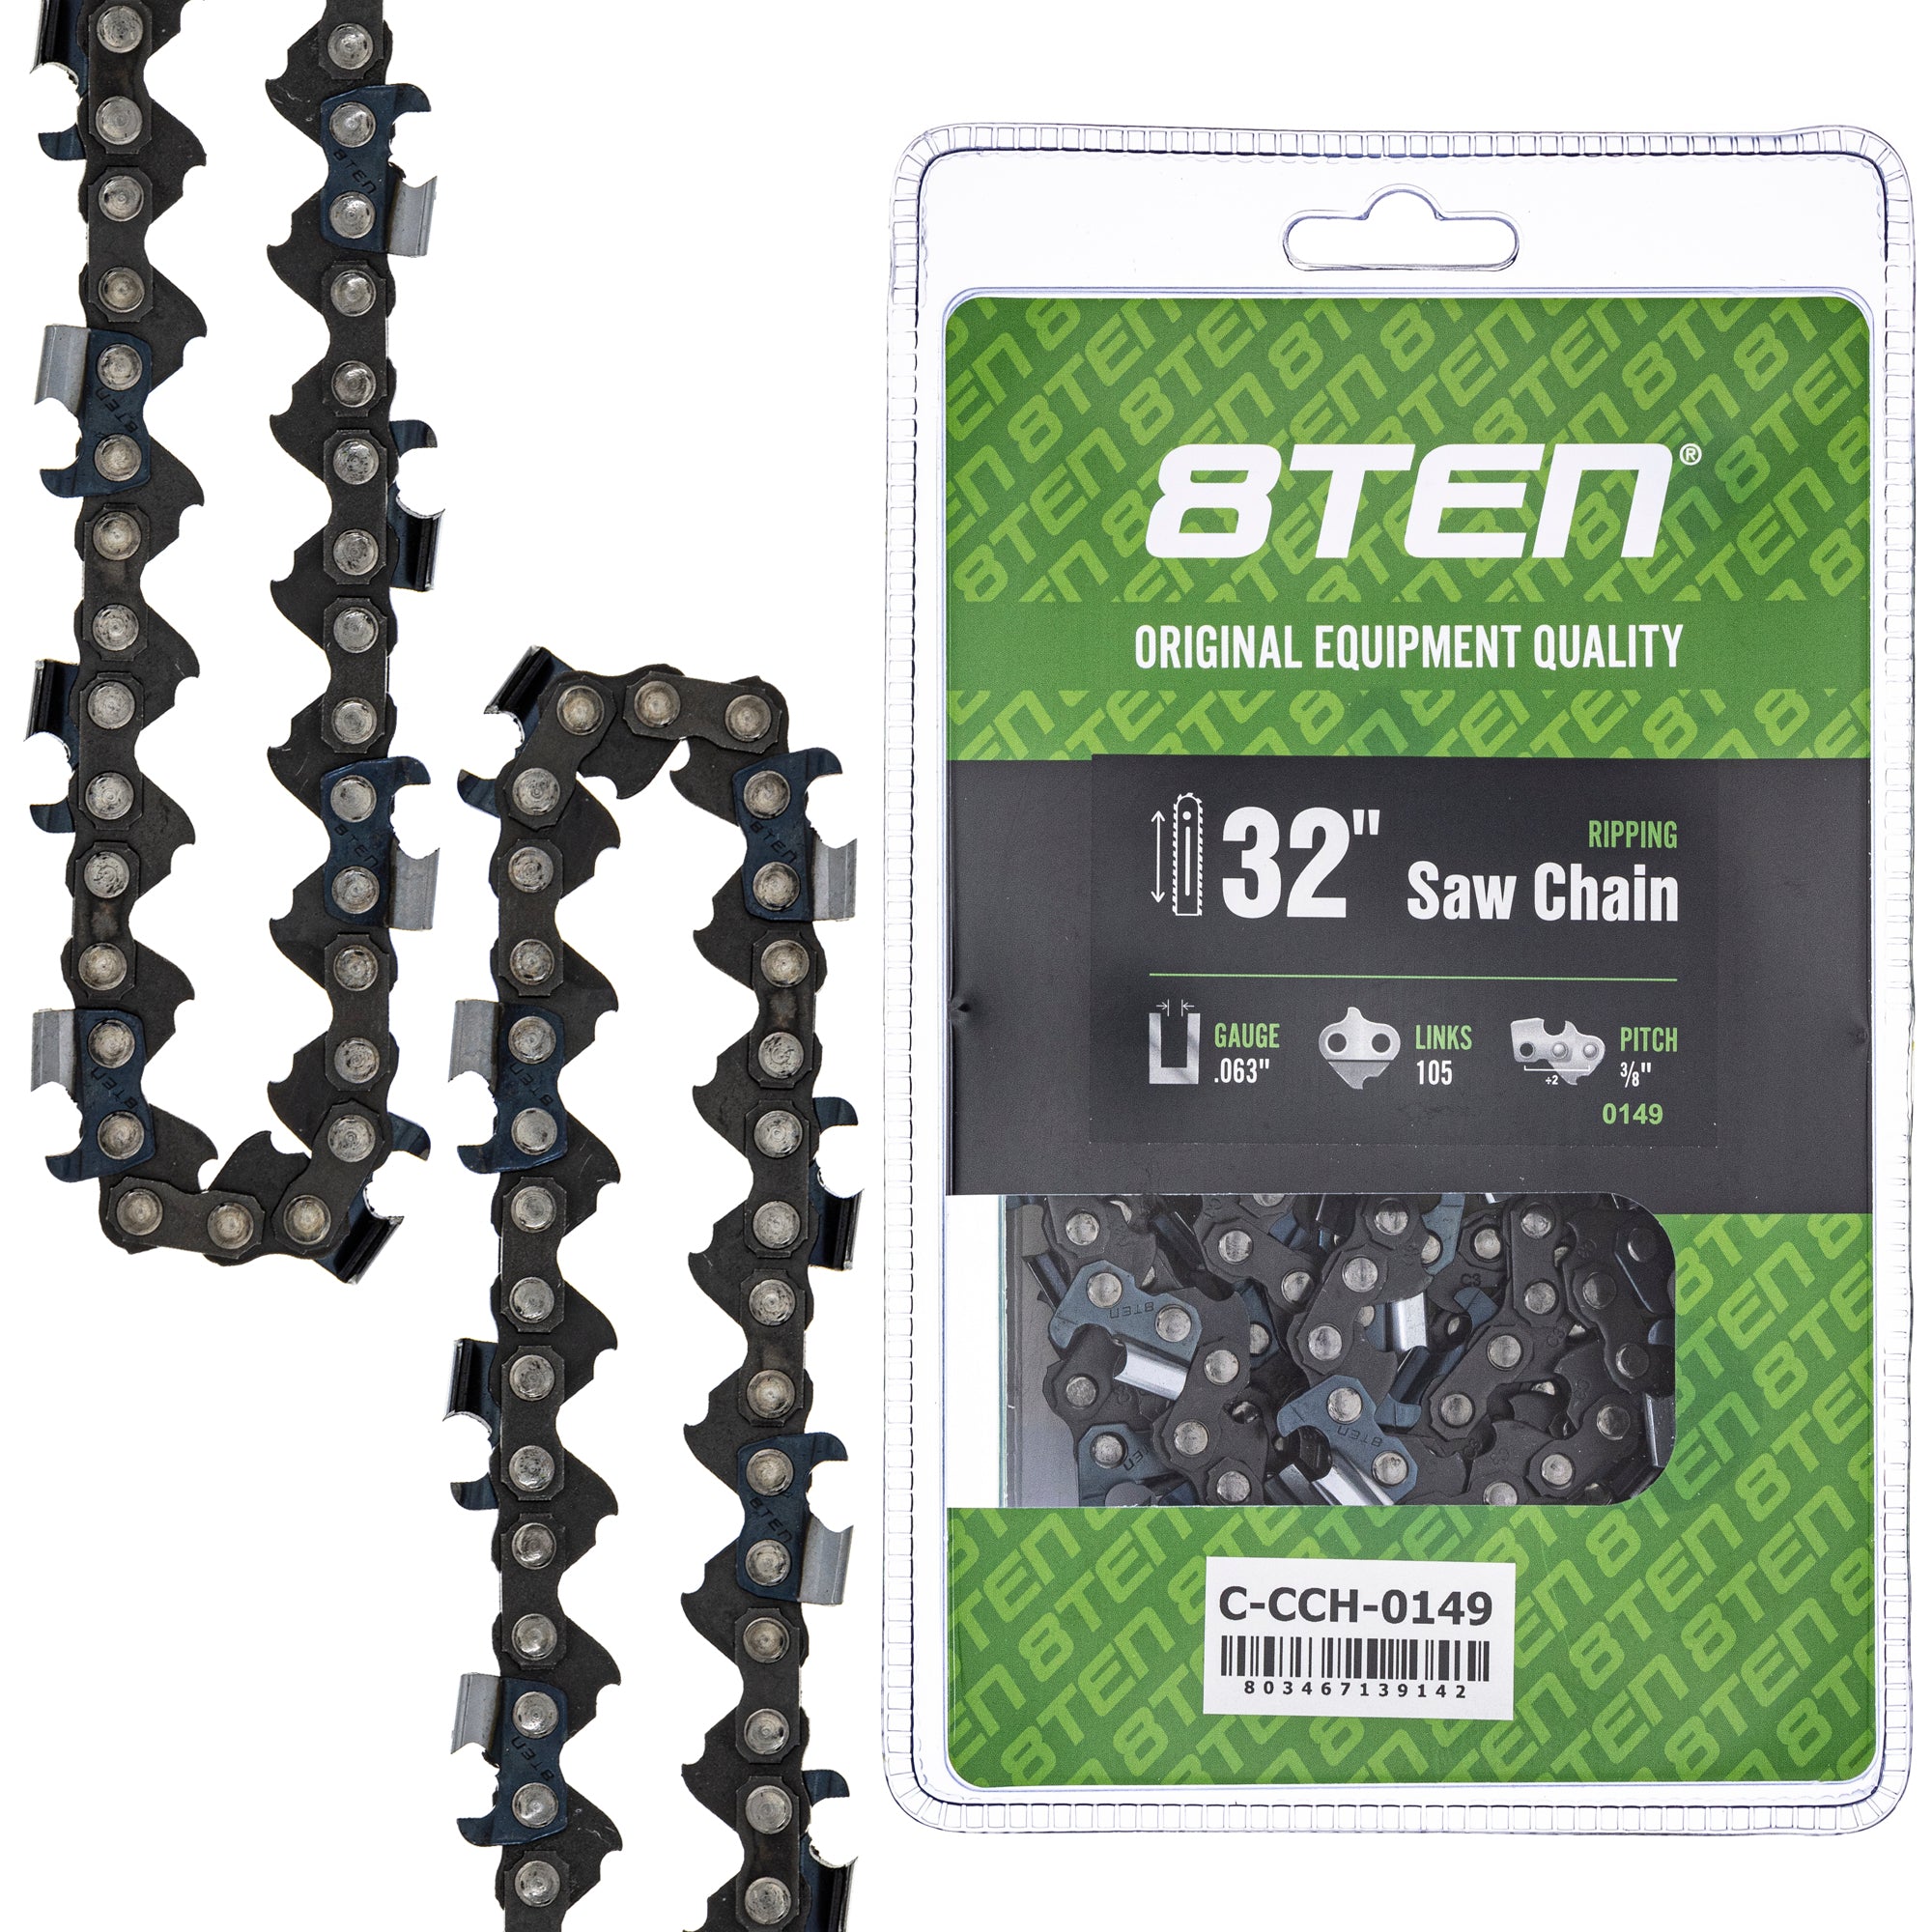 Chainsaw Chain 32 Inch .063 3/8 105DL for zOTHER Oregon XL VI Super PS 8TEN 810-CCC2361H